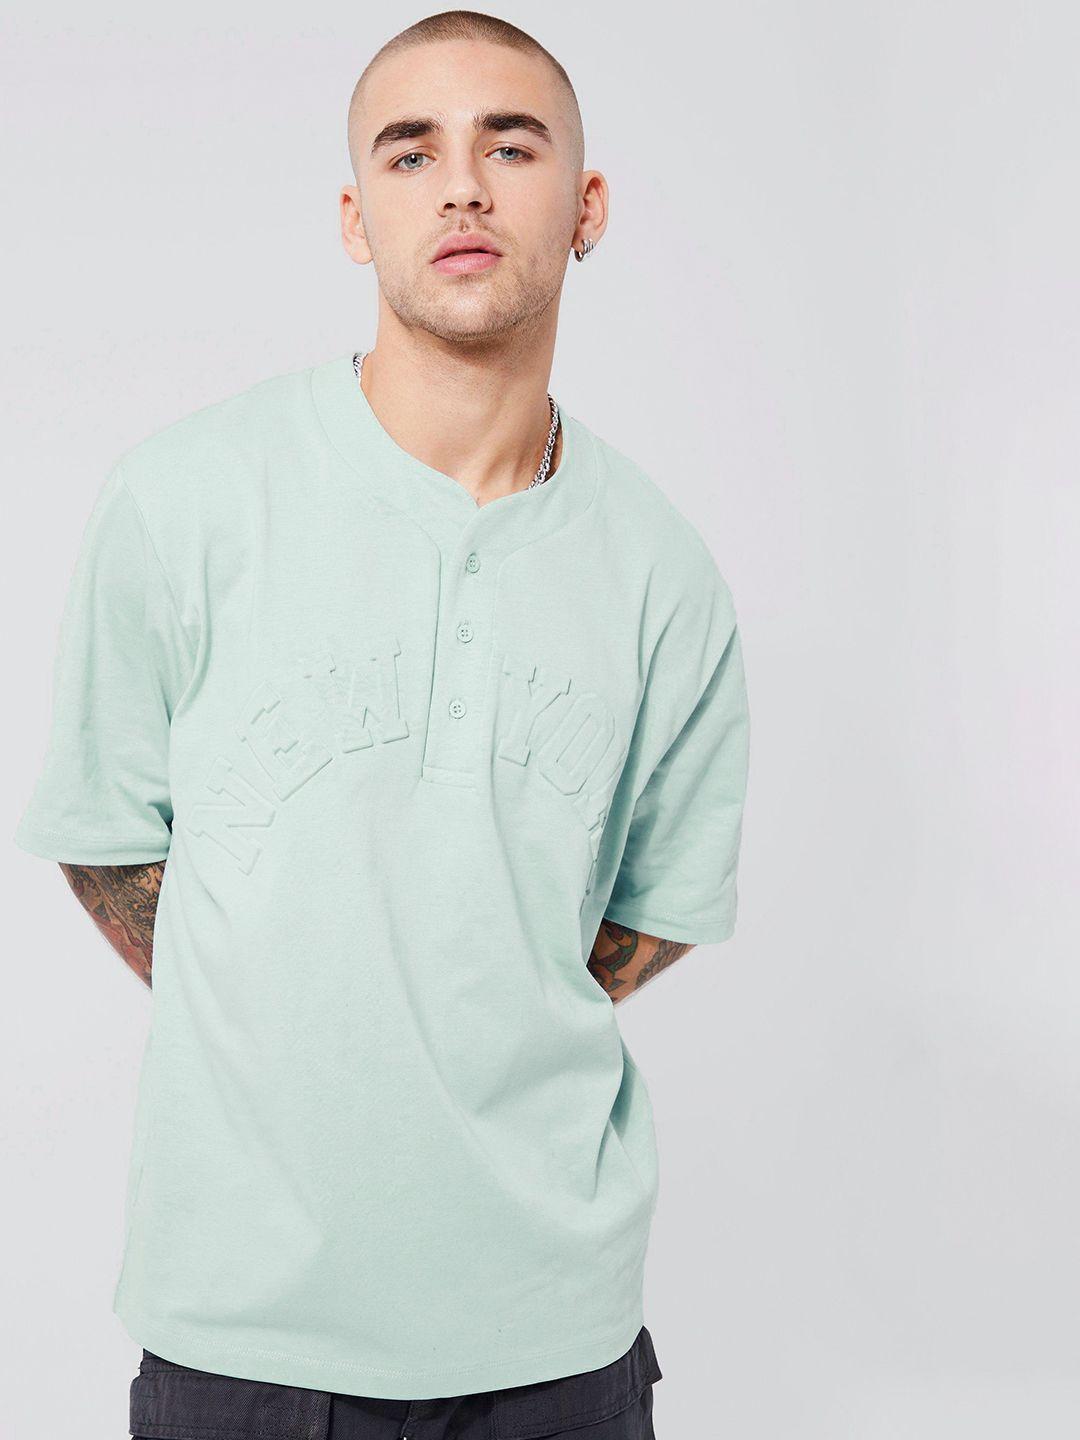 boohooman oversized typography embossed pure cotton t-shirt